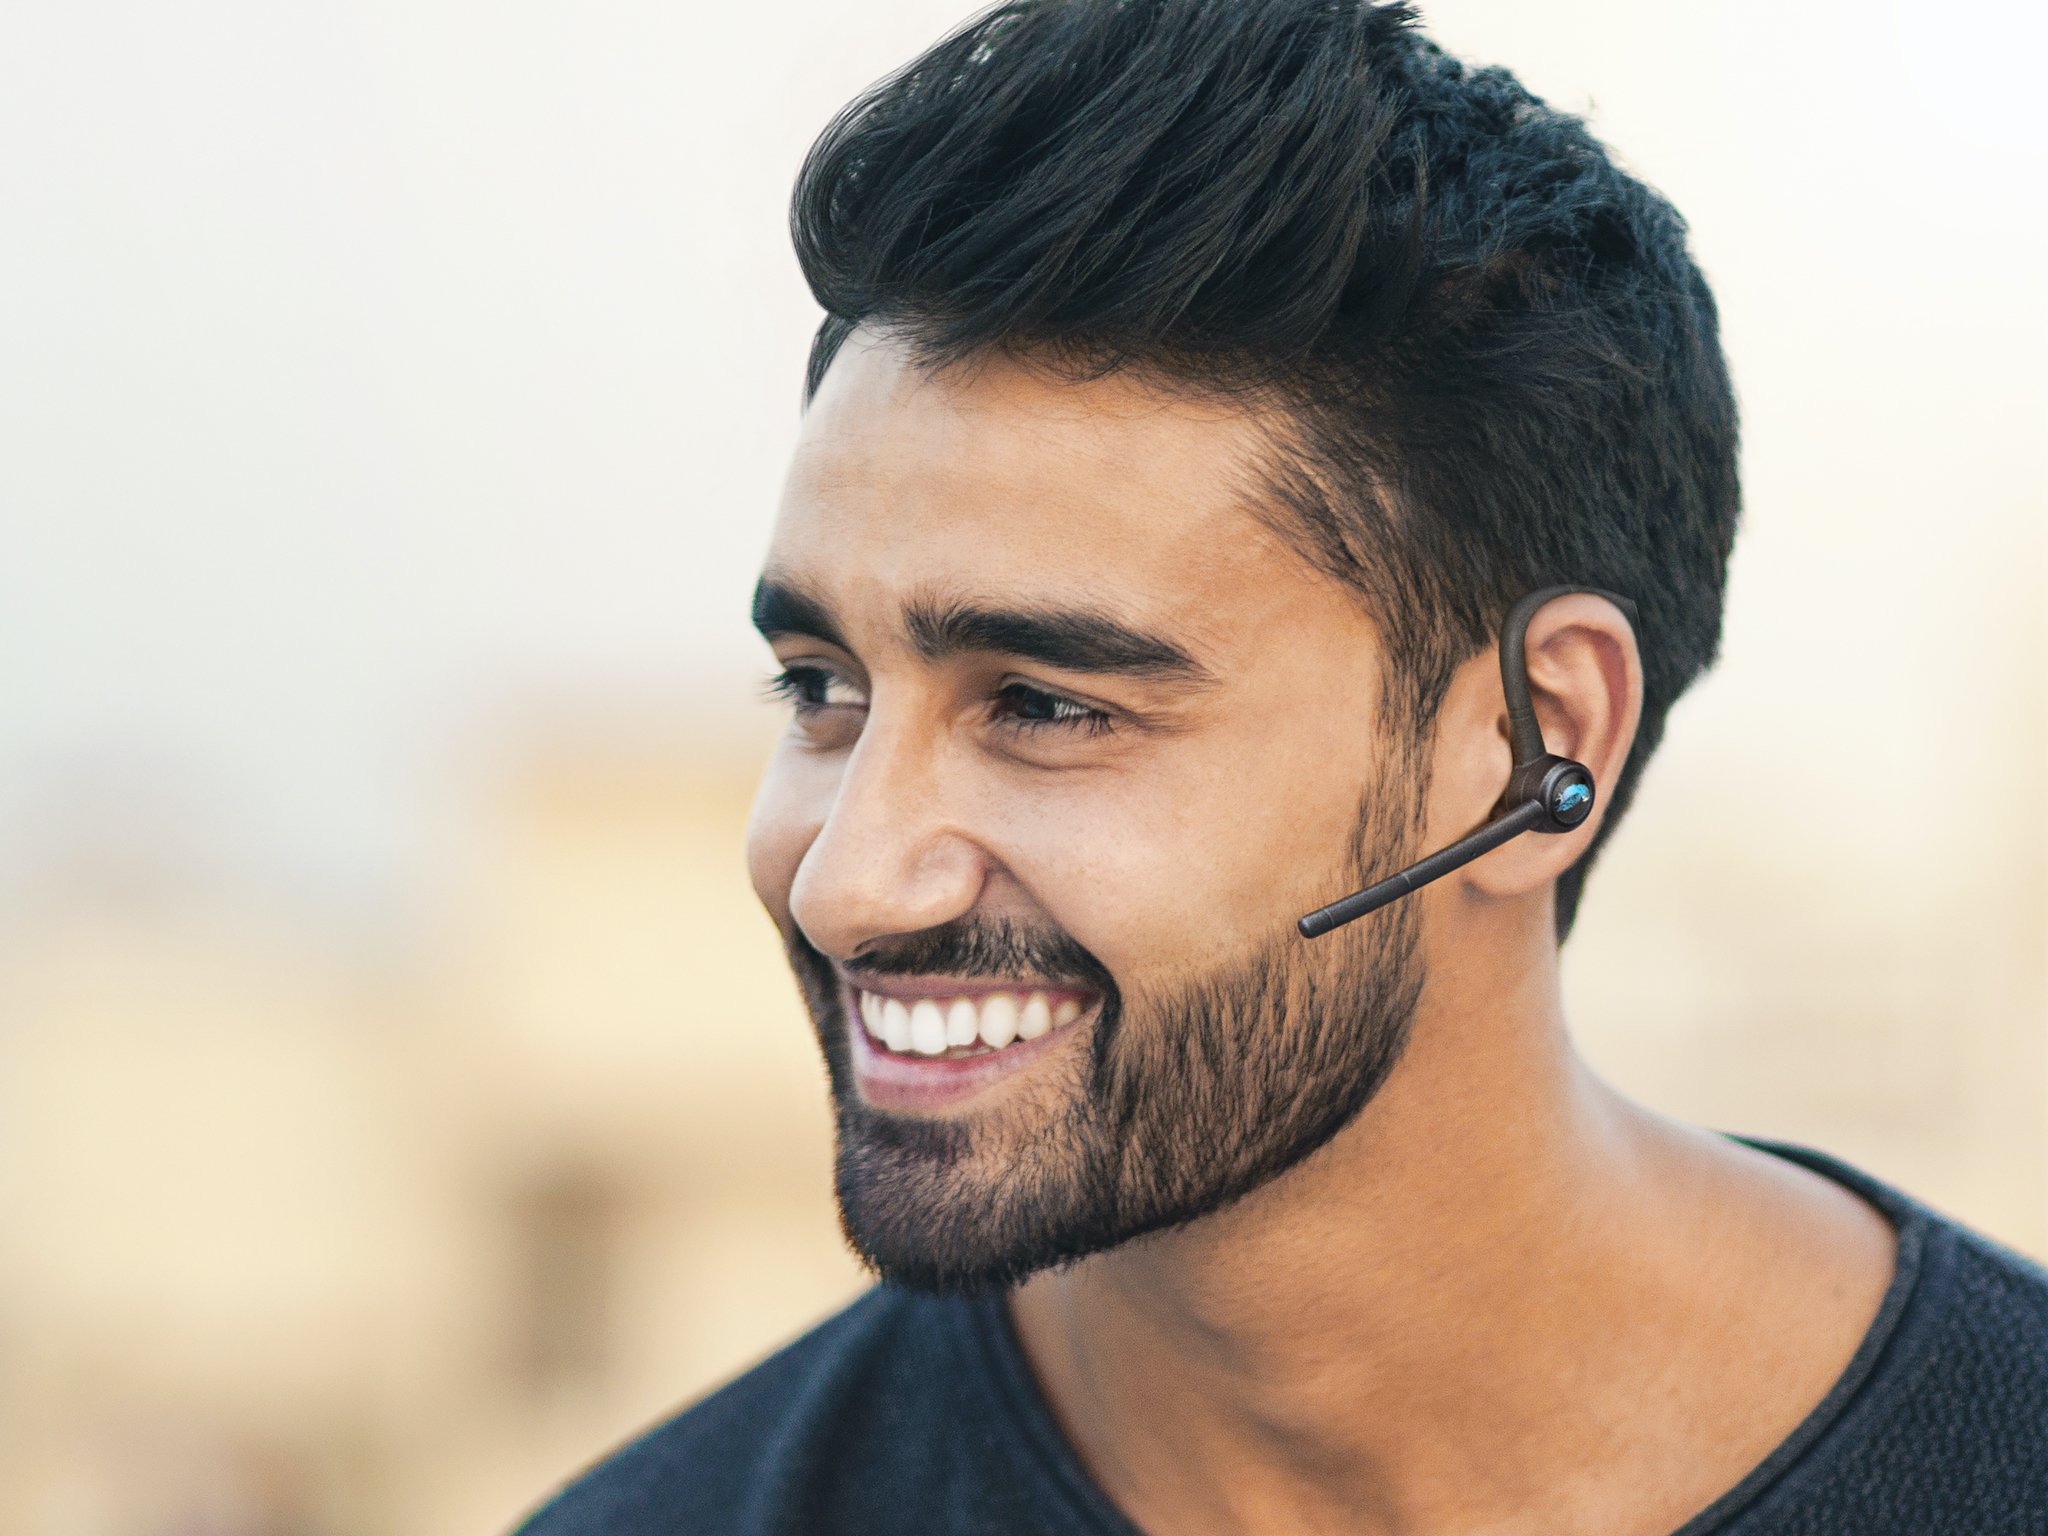 Side view portrait of a beautifull smiling man indian ethnicity